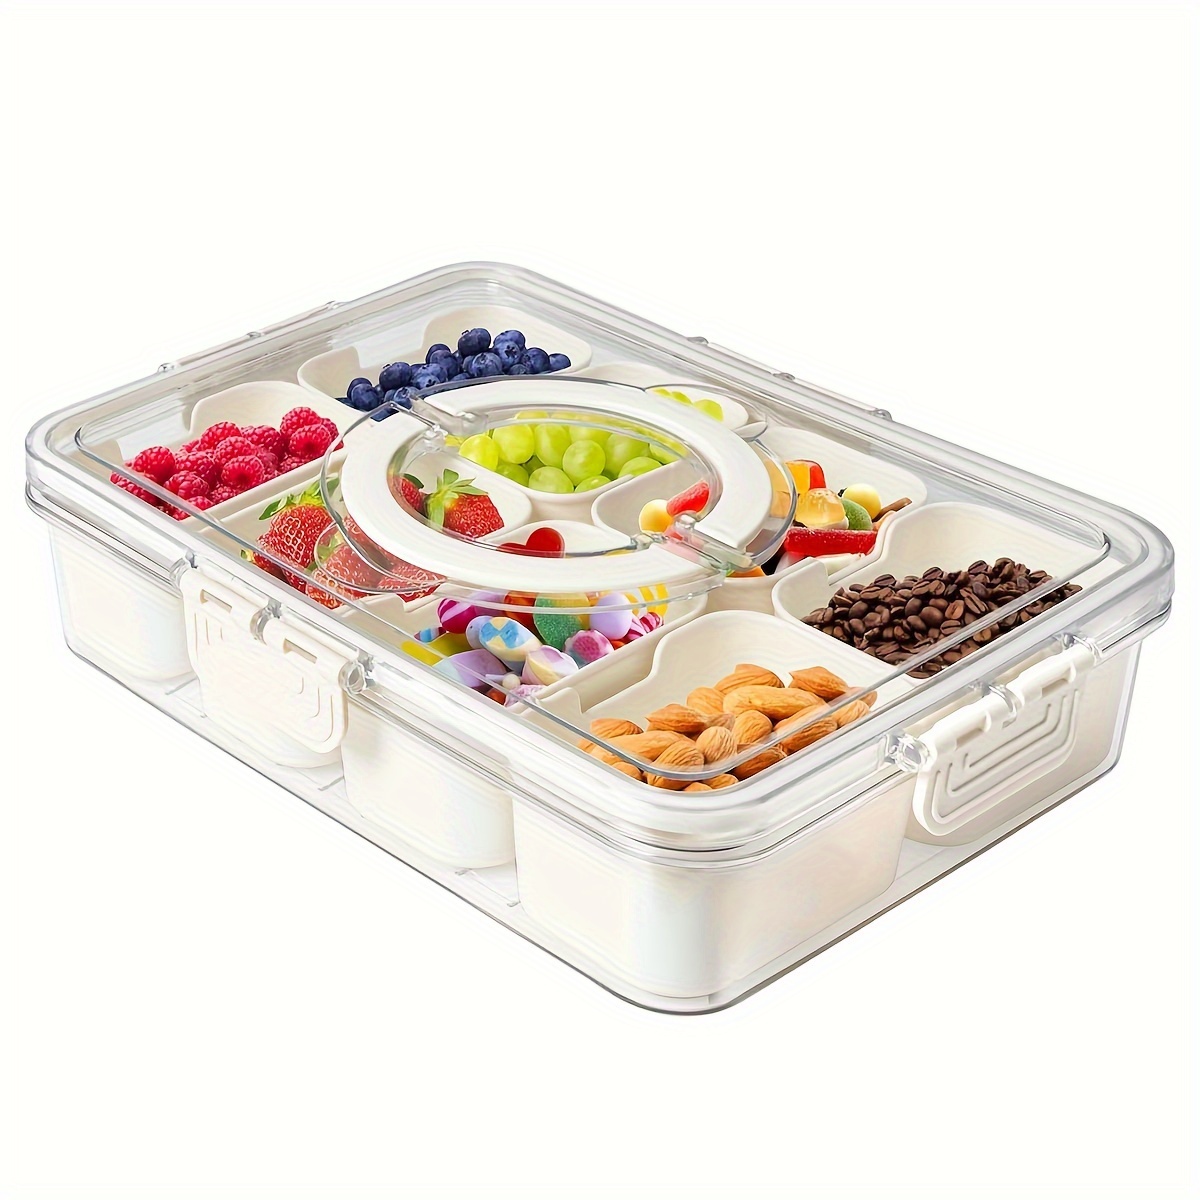 

1pc Modern Plastic Food Storage Lunch Box With Lid, Square Multi-compartment Organizer Tray With 8 Sections And Dual Handles, Ideal For Candy, Nuts, Biscuits, Fruits, Snacks